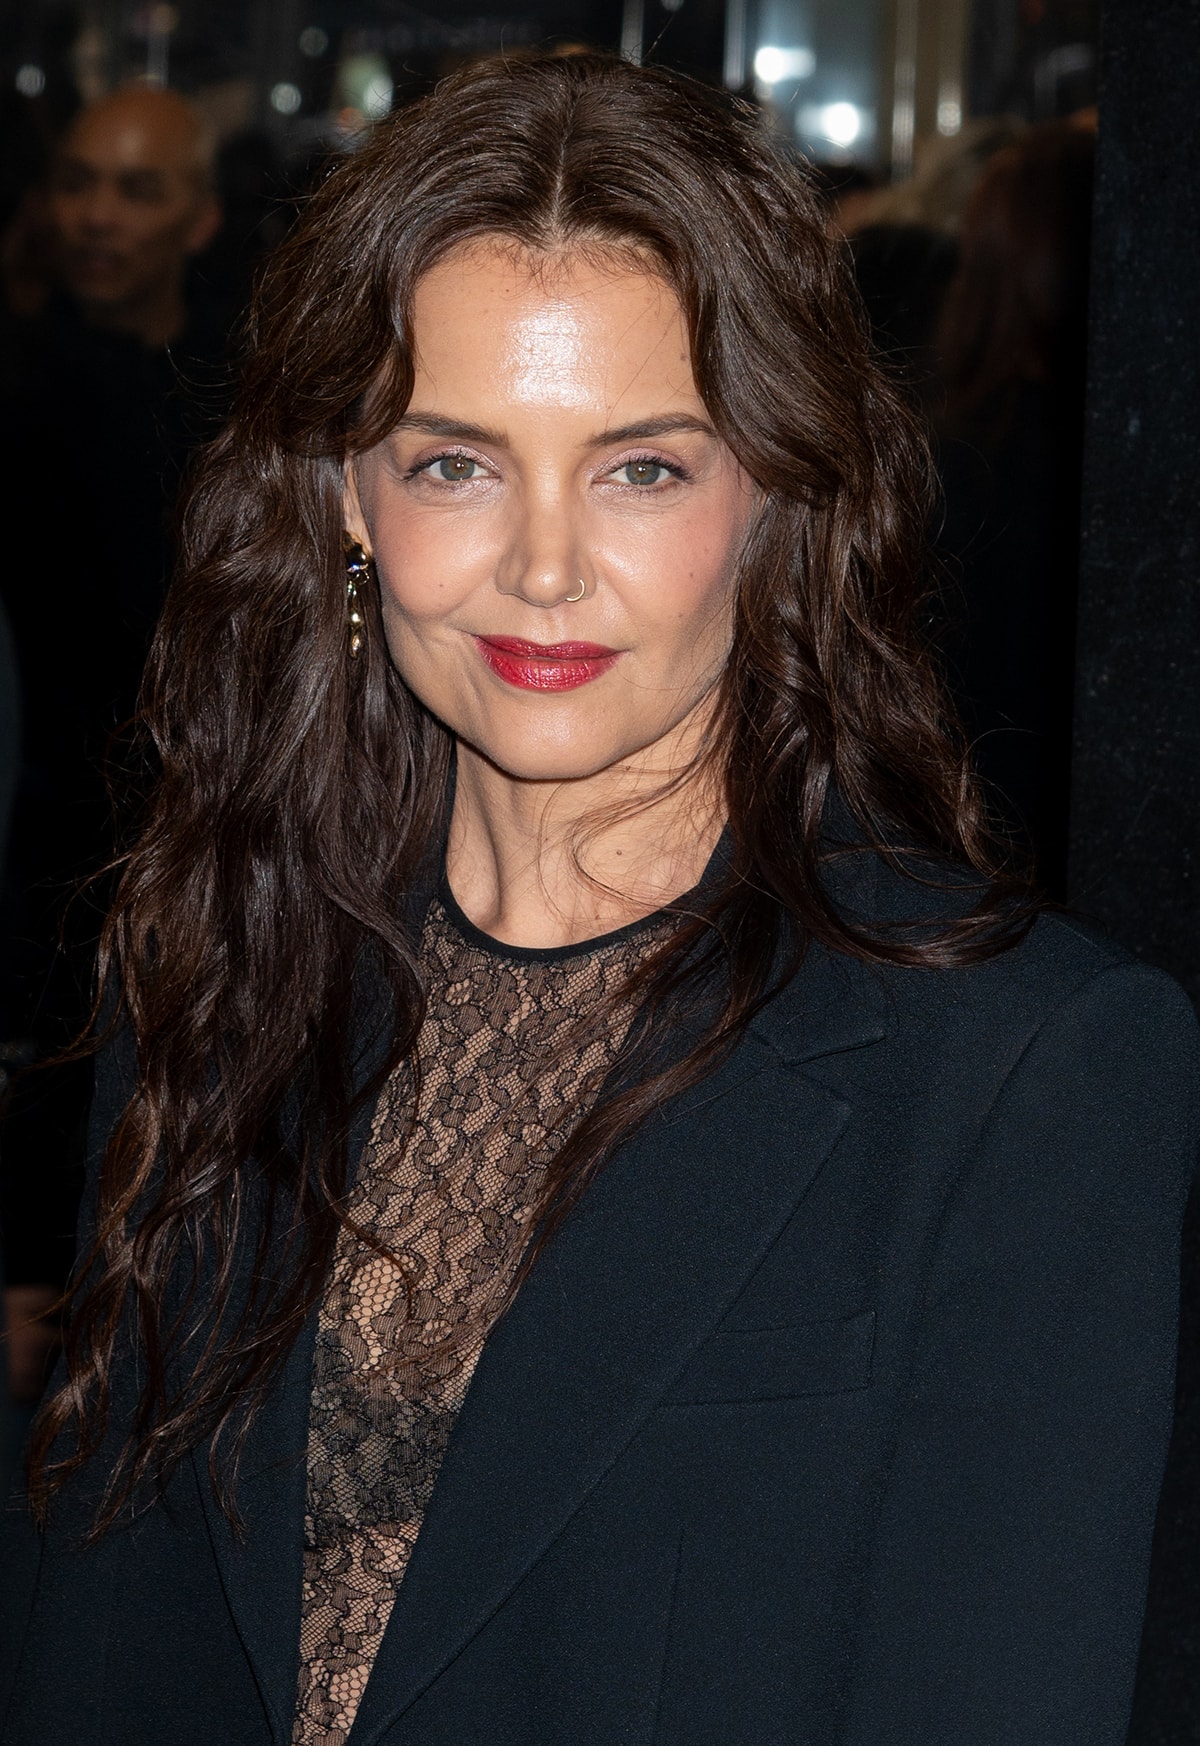 Katie Holmes keeps her look sensual with beachy waves and bold red lips